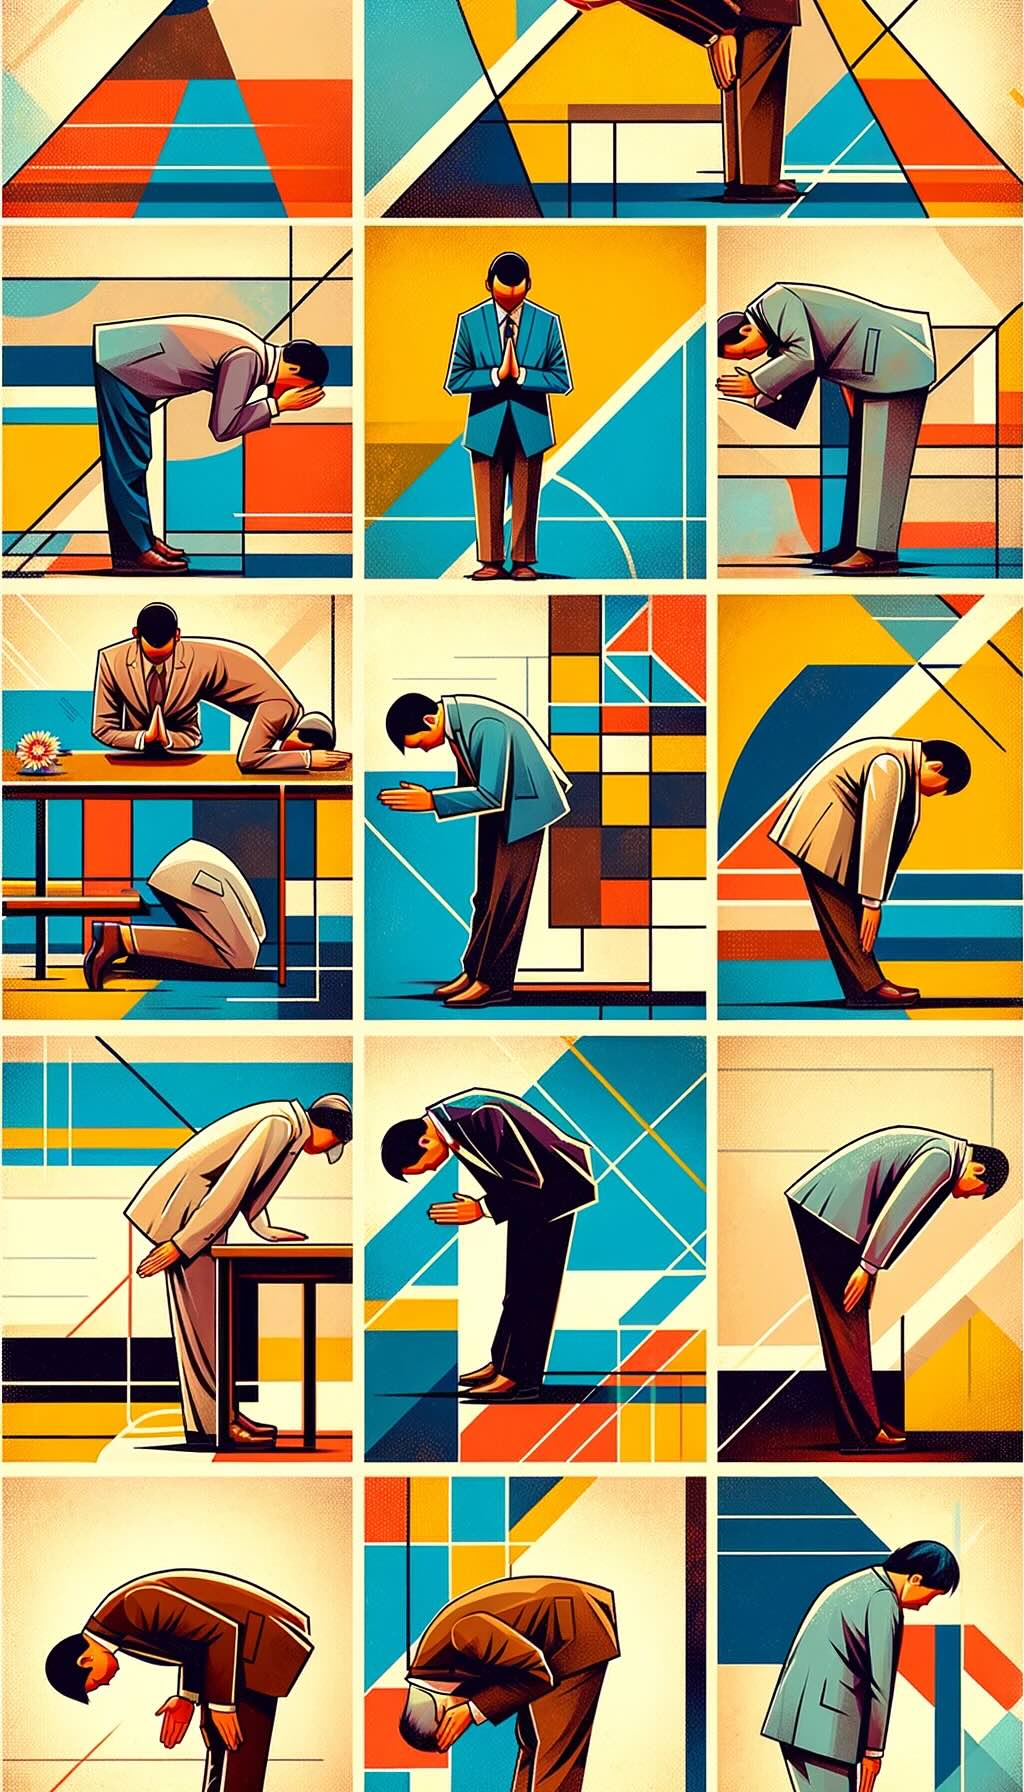 Interprets common bowing mistakes in Japan, each scenario depicted with a unique blend of bold colors and abstract forms: Over-bowing in a Casual Setting: This scene shows an exaggeratedly deep bow in a casual environment, highlighted by overly formal postures against a relaxed backdrop, illustrating the disconnect. Under-bowing in a Formal Setting: A figure is depicted bowing too shallowly amidst a more formal and rigid context, emphasizing the lack of depth in the bow. Awkward Timing in Bowing: This part of the image captures a character bowing at an inopportune moment, disrupting the flow of a depicted conversation, creating a sense of interruption. Lack of Sincerity: Here, a character's bow lacks genuine emotion, indicated by a disjointed and awkward posture, contrasting with the expected sincerity of the gesture. Incorrect Posture During a Bow: This segment shows a person with poor posture while bowing – slouching and fidgeting, conveying a sense of carelessness.